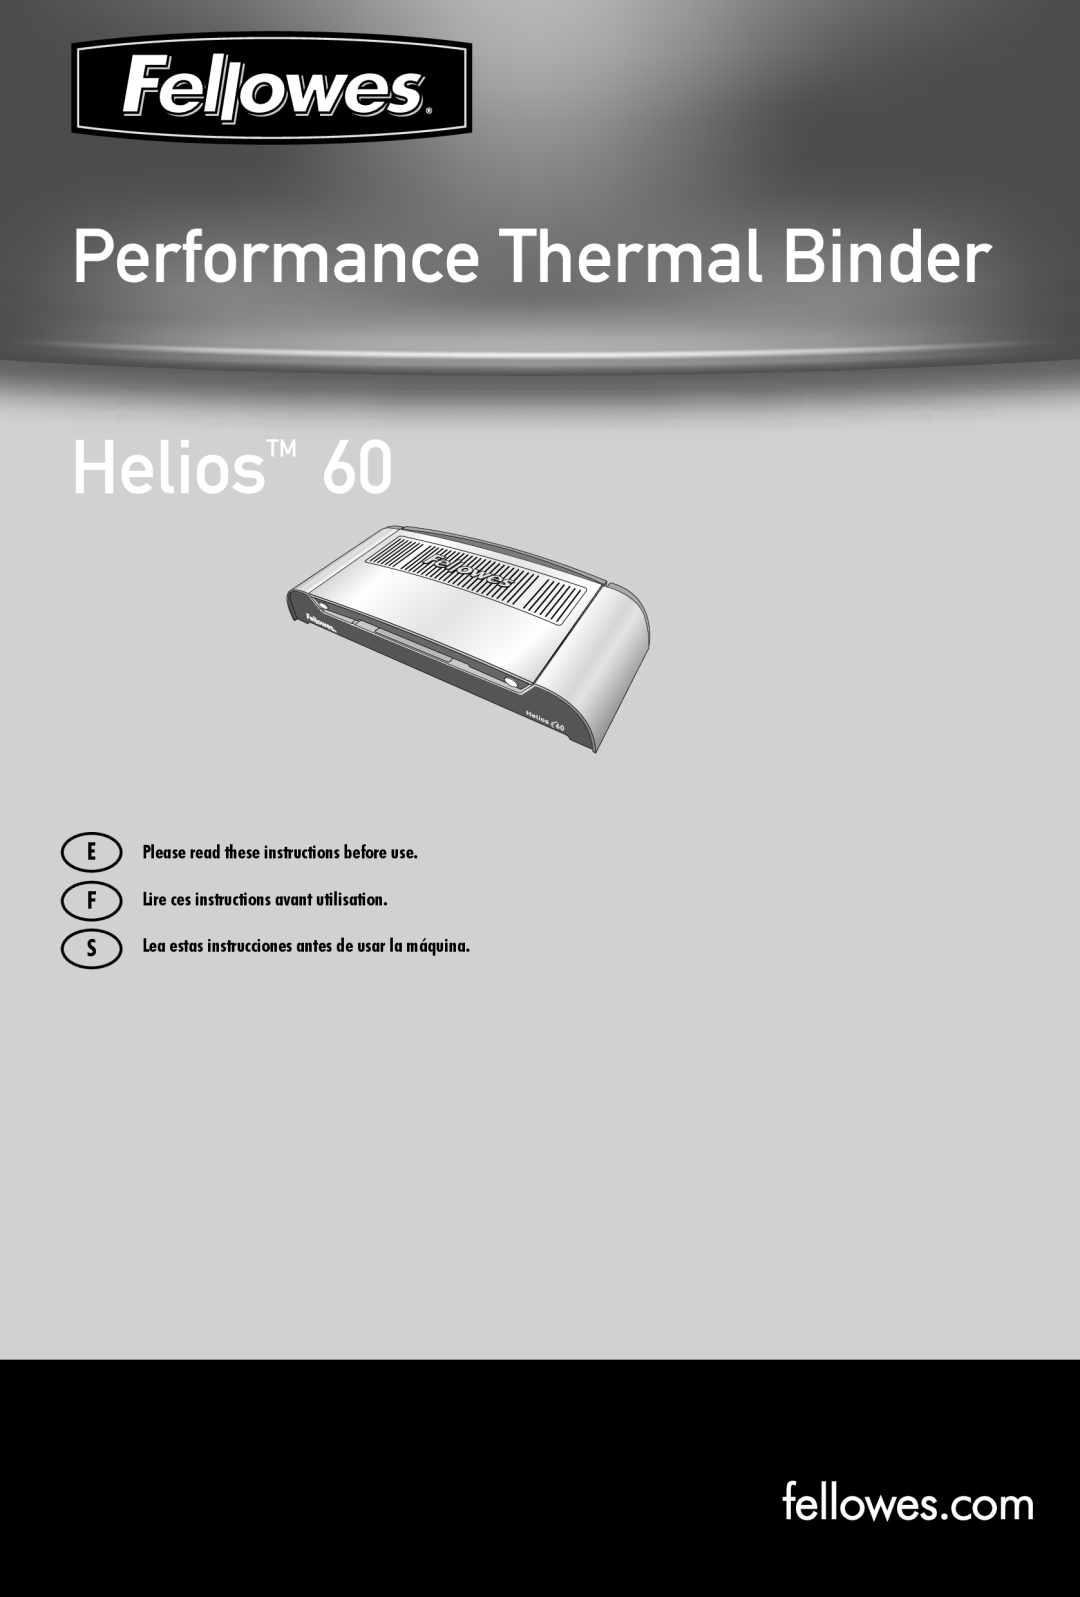 Fellowes 60 manual Performance Thermal Binder HeliosTM, E Please read these instructions before use 